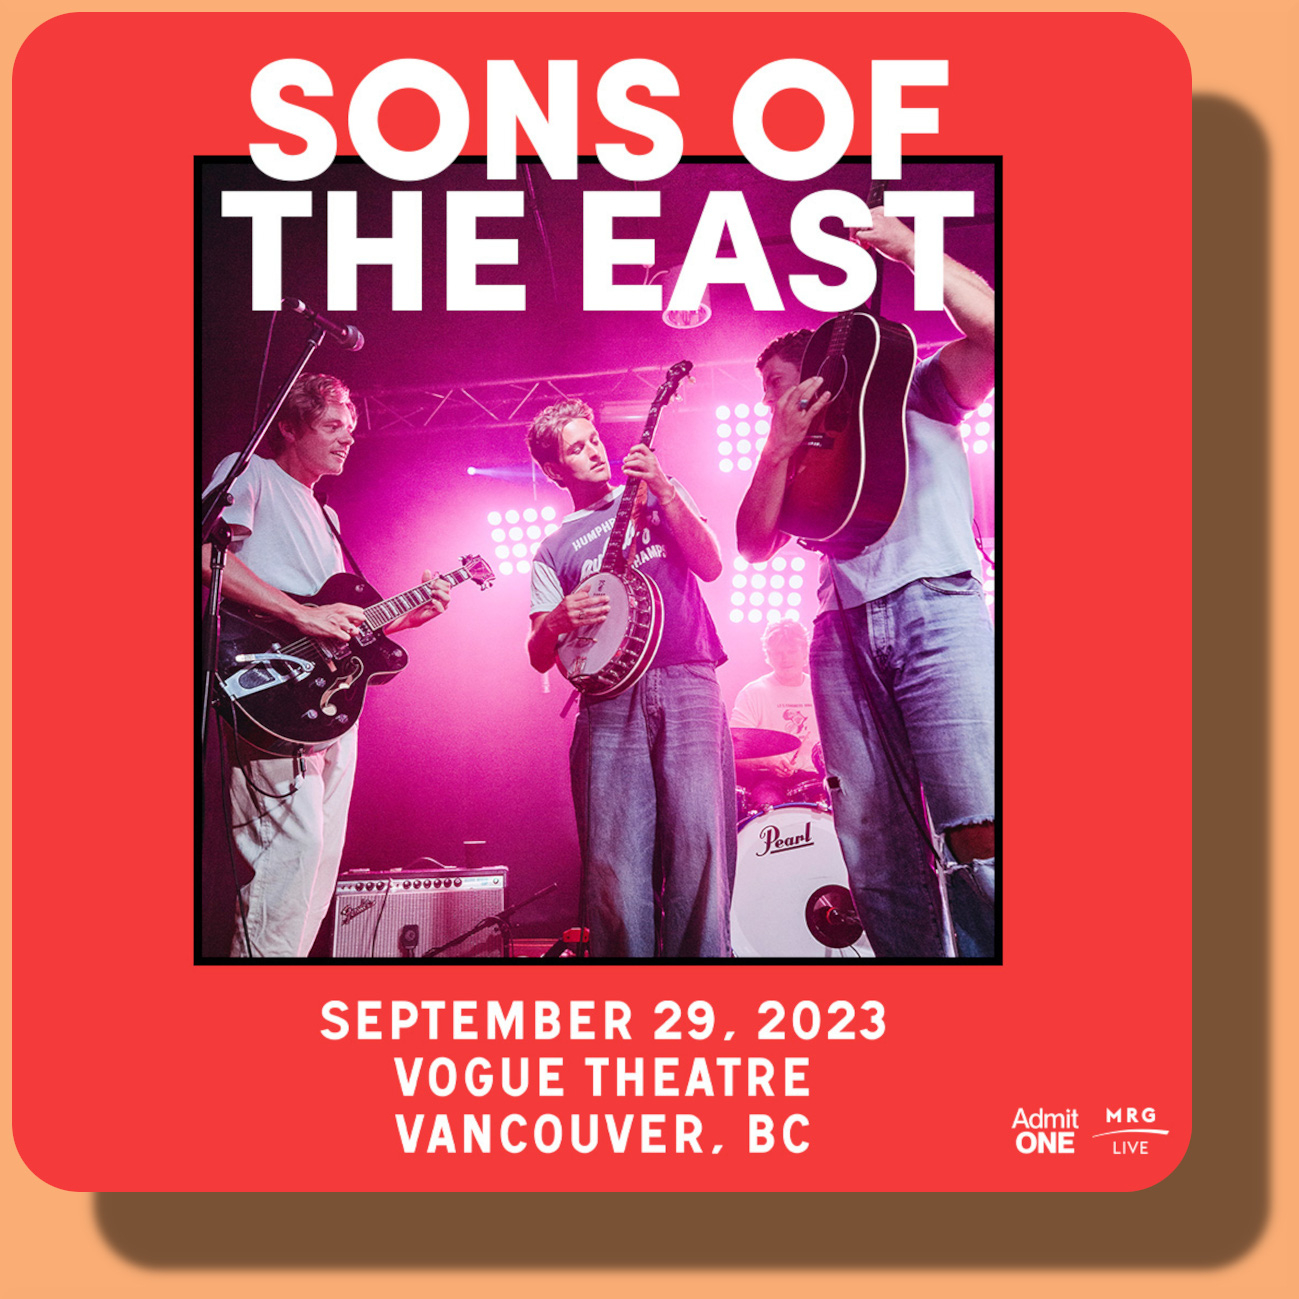 Sons of the East, Vancouver - September 29, Vogue Theatre, 918 Granville Street